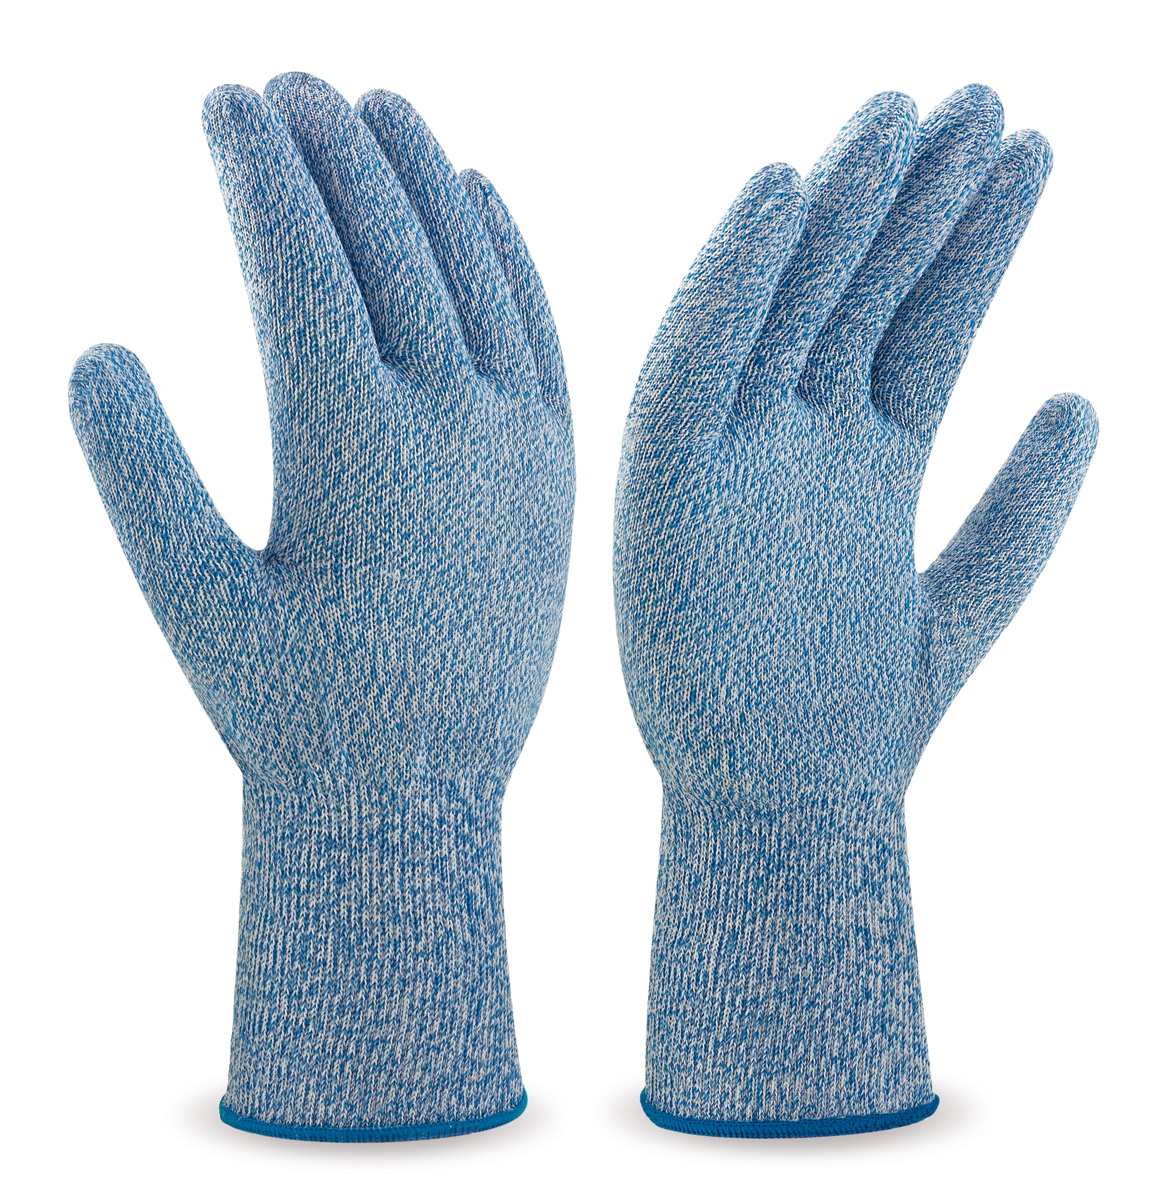 688-AA Work Gloves Anti-cut Blue coloured Level 5 cut resistant for the food processing industry